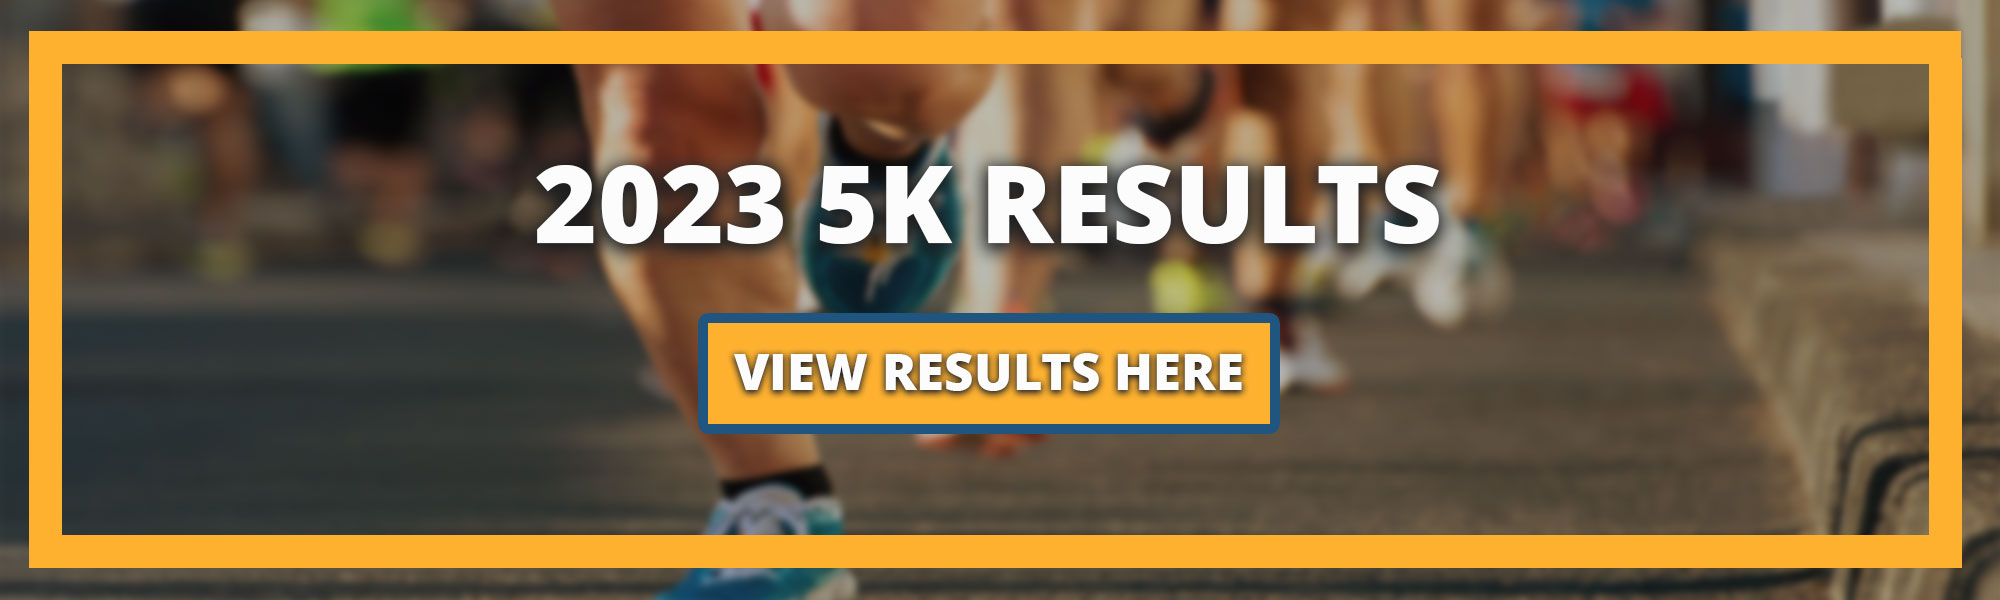 2023 5K Results

View Results Here